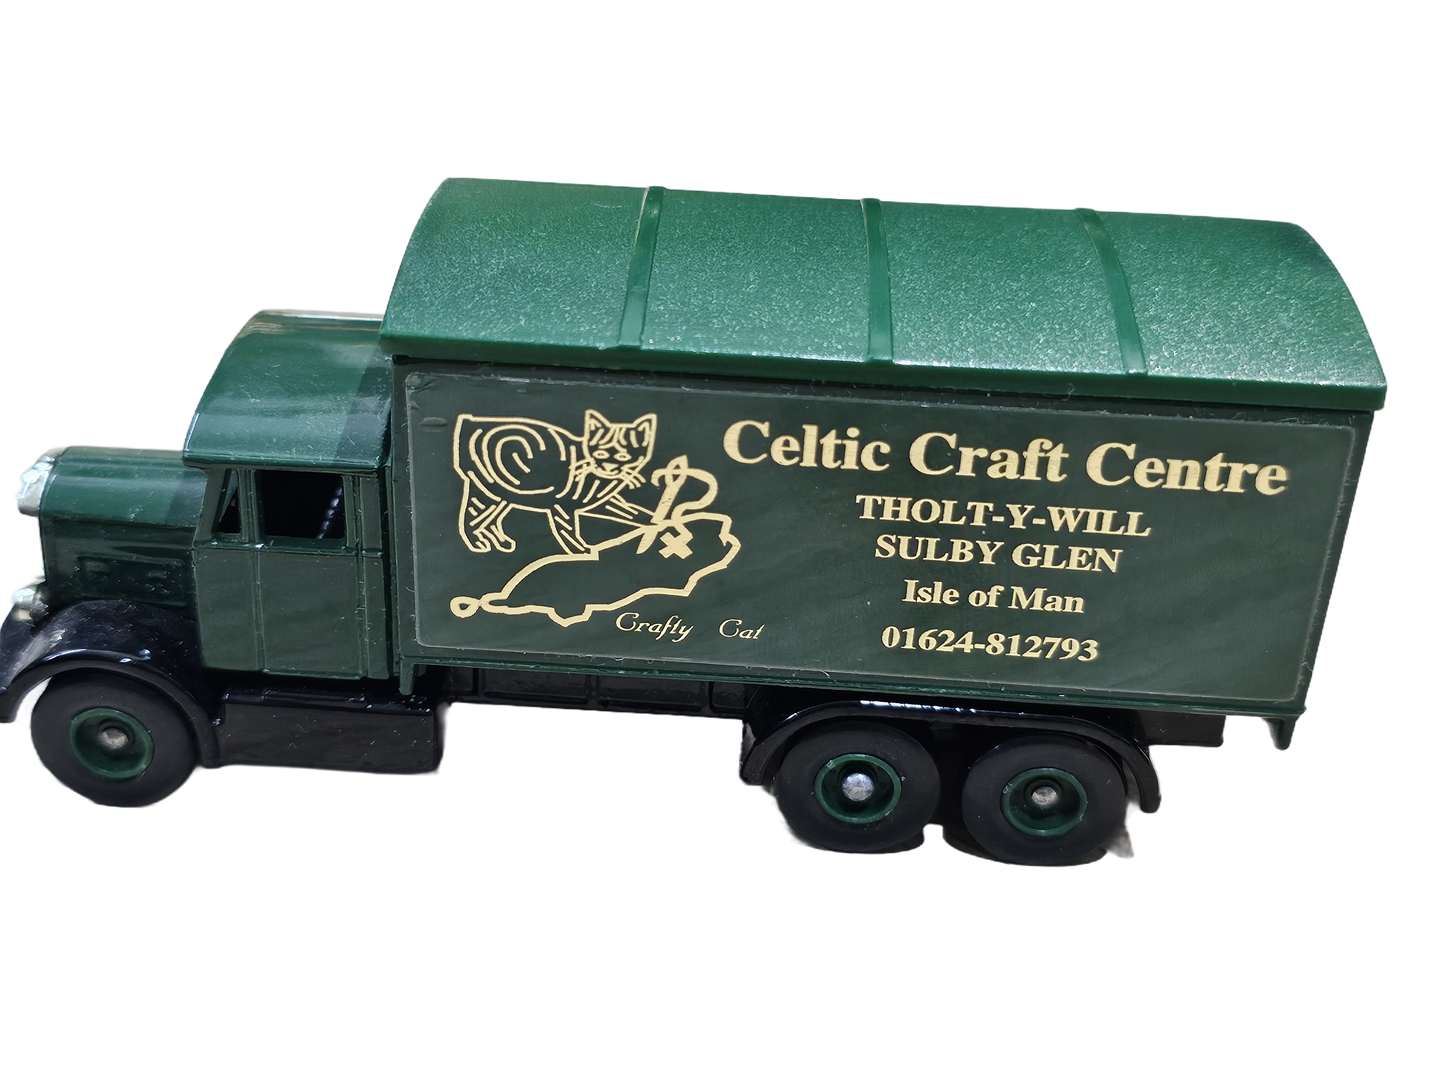 LLedo Scammell 6w Truck, Celtic Craft Centre, Tholt-Y-Will, Sulby Glen, Isle of Man - usado